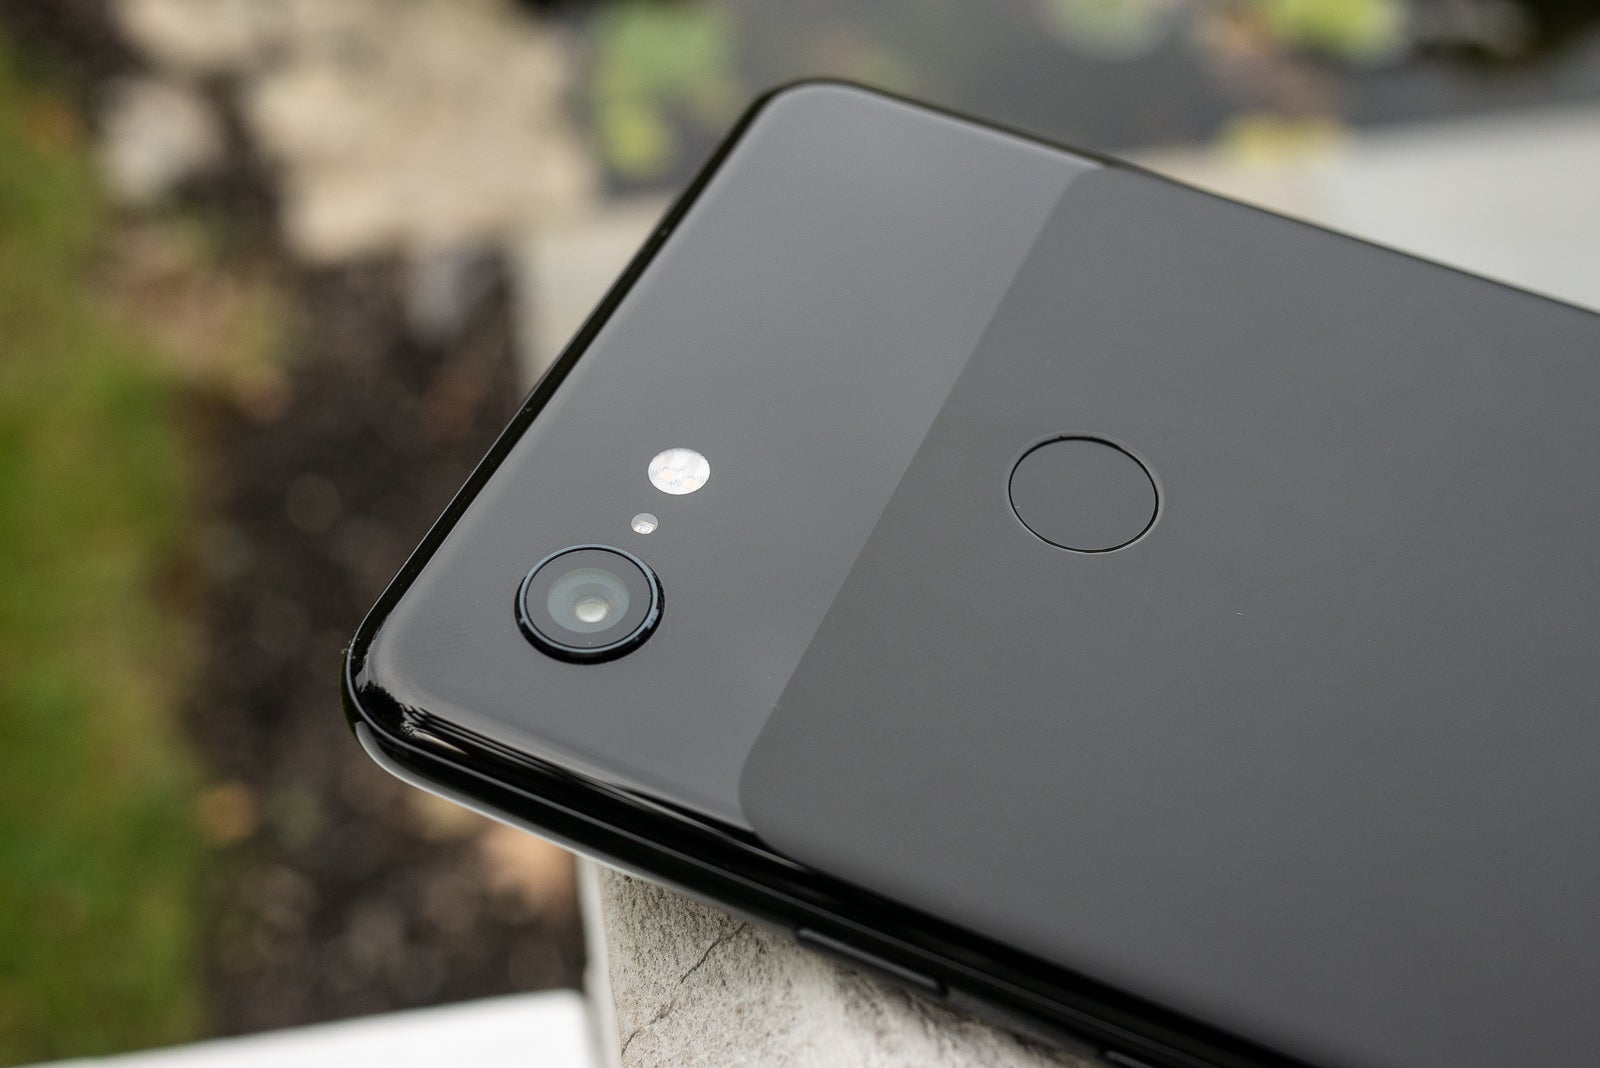 The Google Pixel 3 - The Pixel 3a series isn't a one-off; Google has plans for more affordable phones